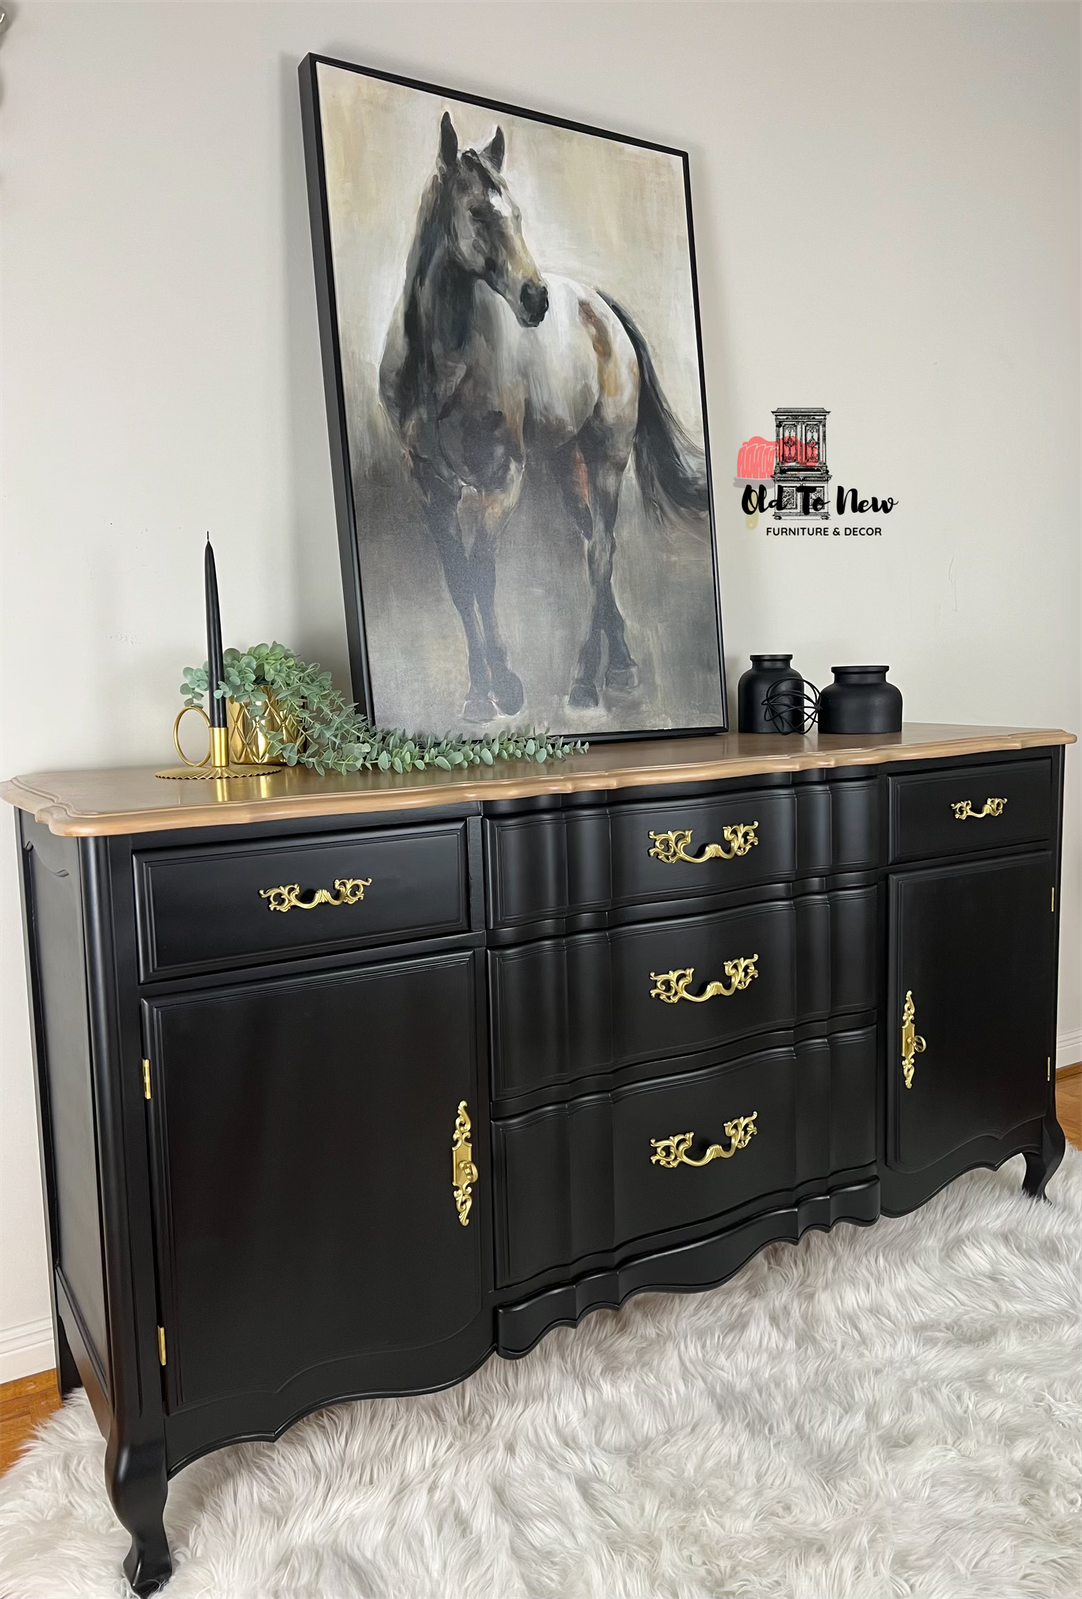 Sideboard Cabinet, Dining Room Storage, Coal Black Fusion Mineral Paint, Old to New Furniture & Decor